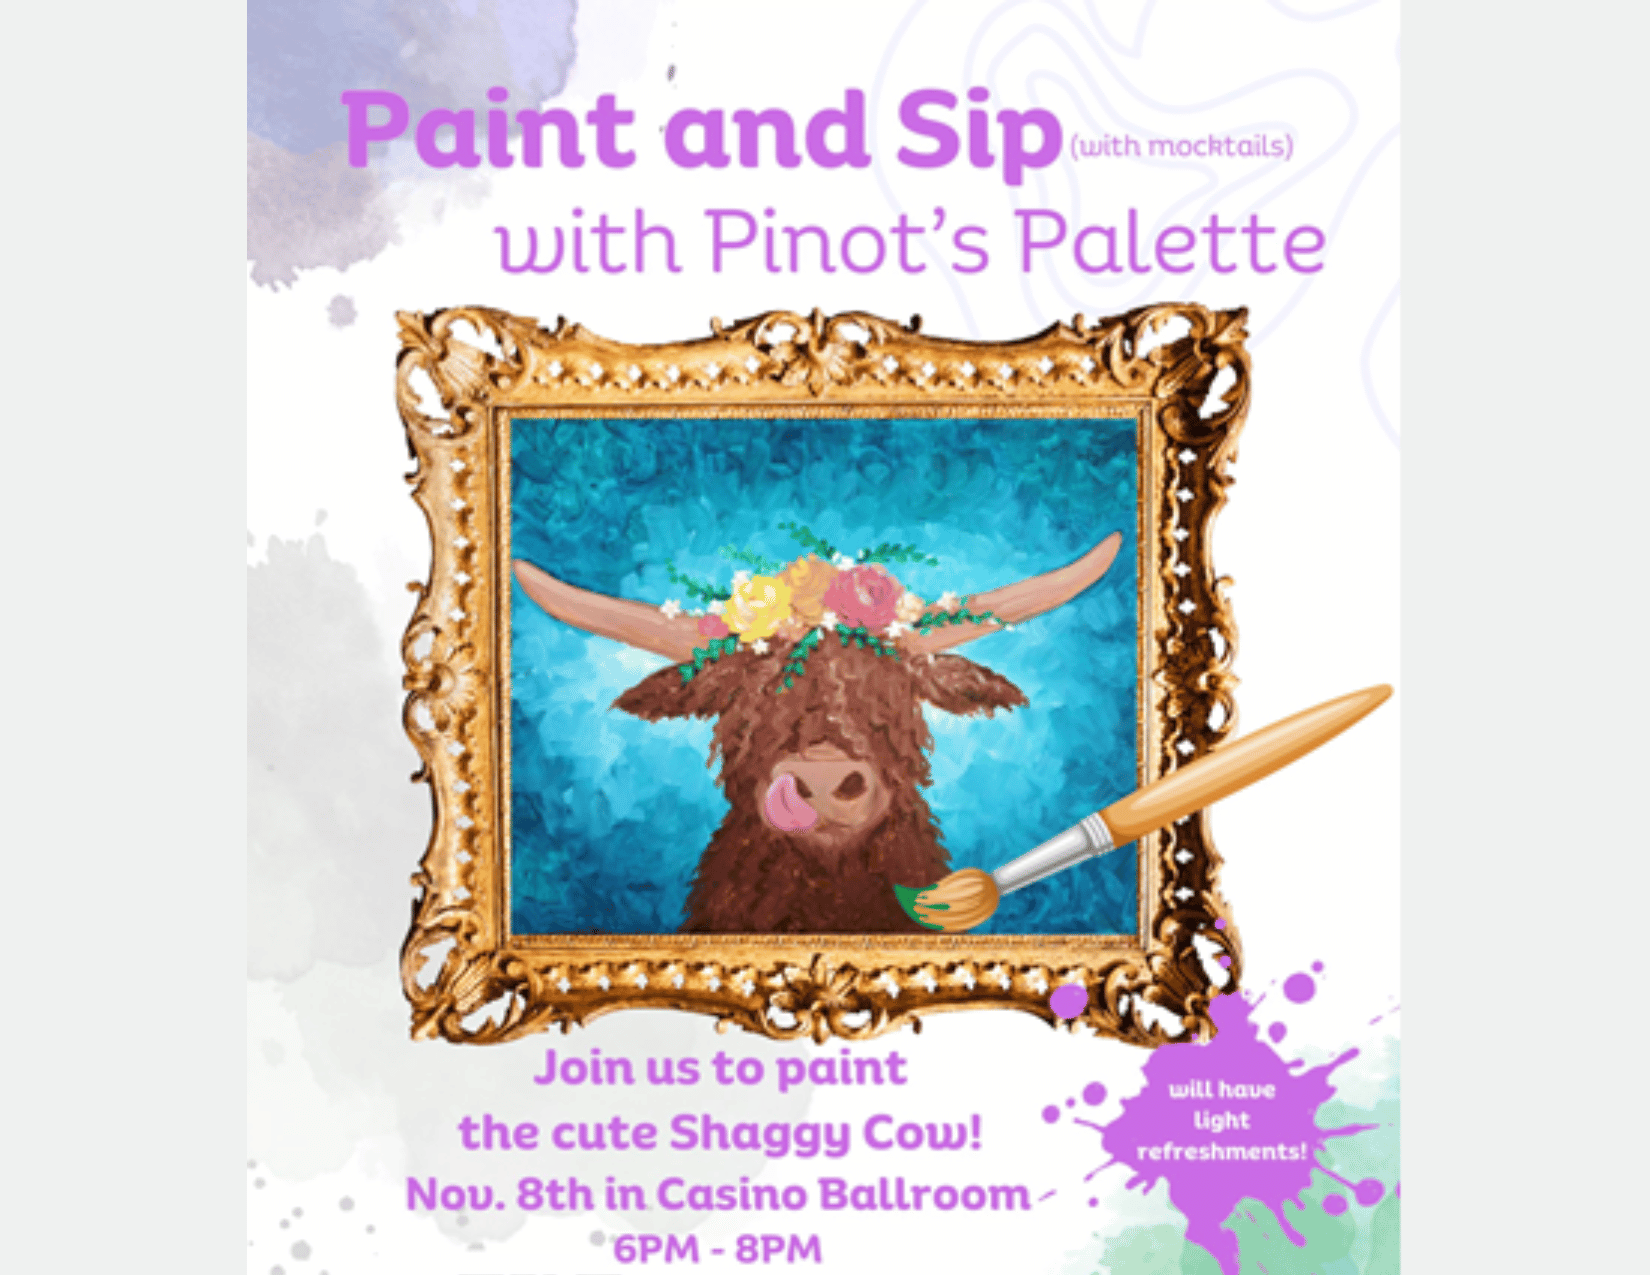 Pinot's Palette with picture of cow painting